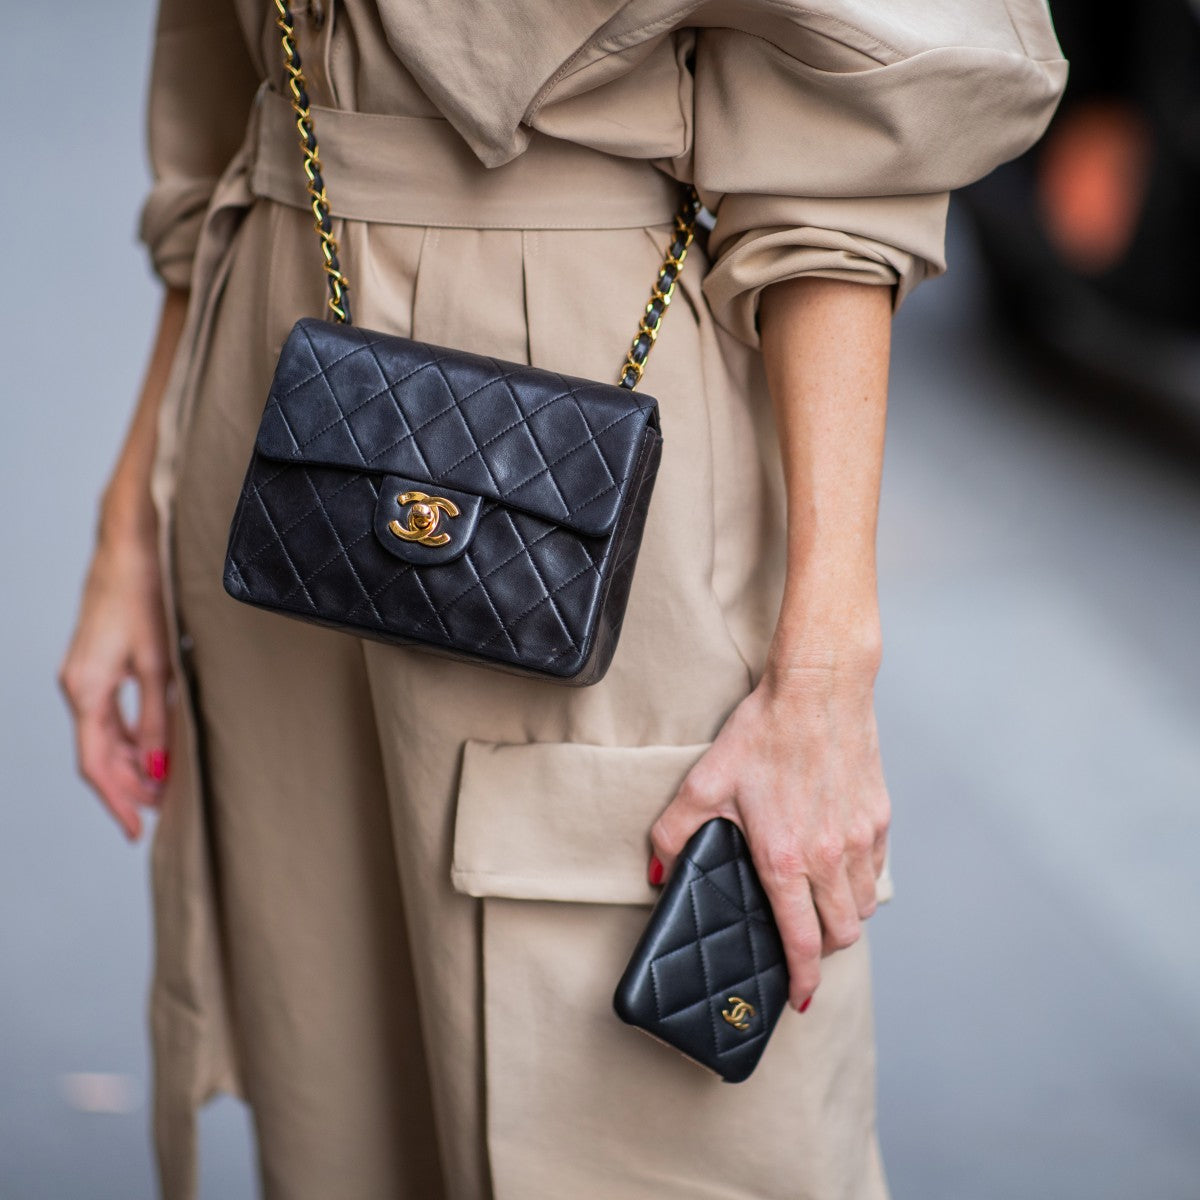 Understanding the Latest Chanel Bag Price Hikes and the Resale Market, Handbags and Accessories